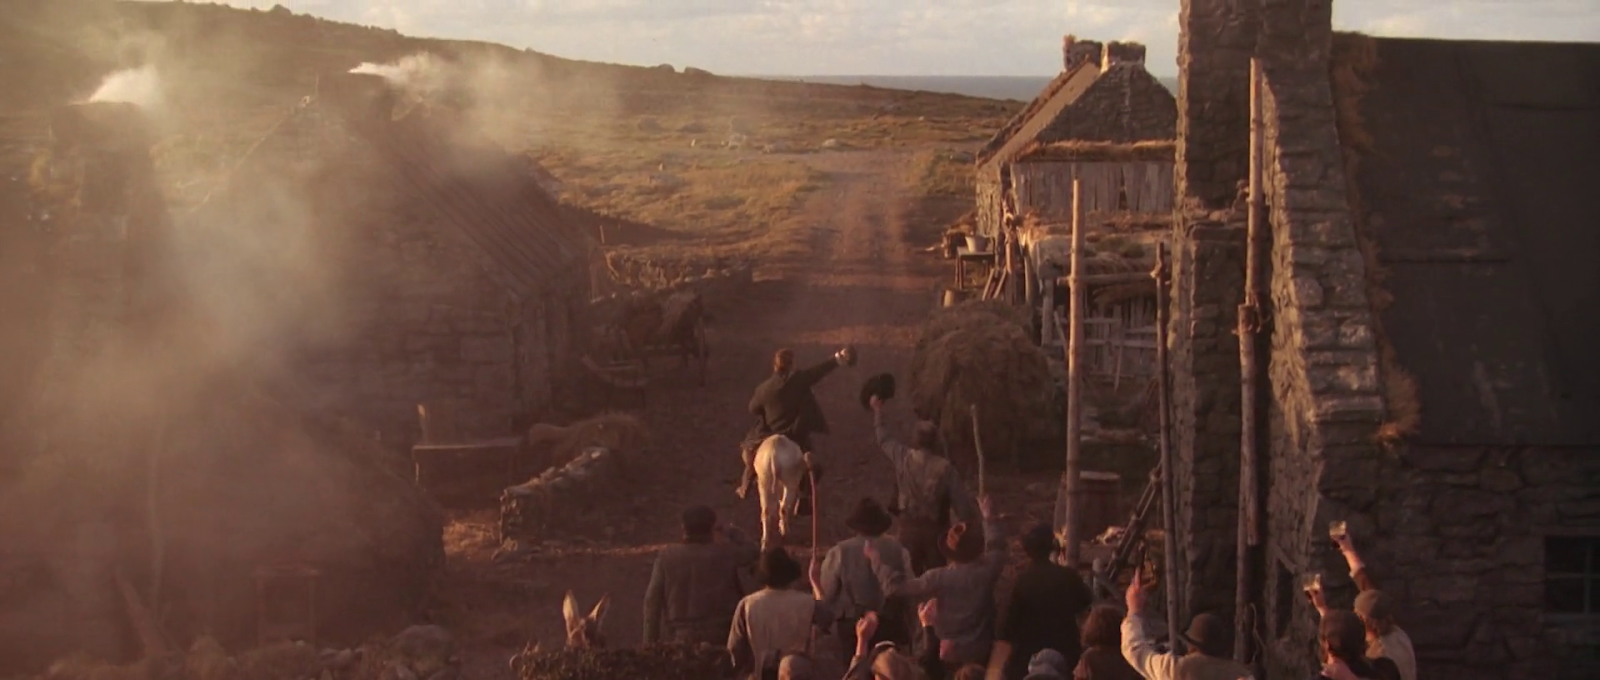 Joseph Donnelly leaves home in Far and Away (1982)